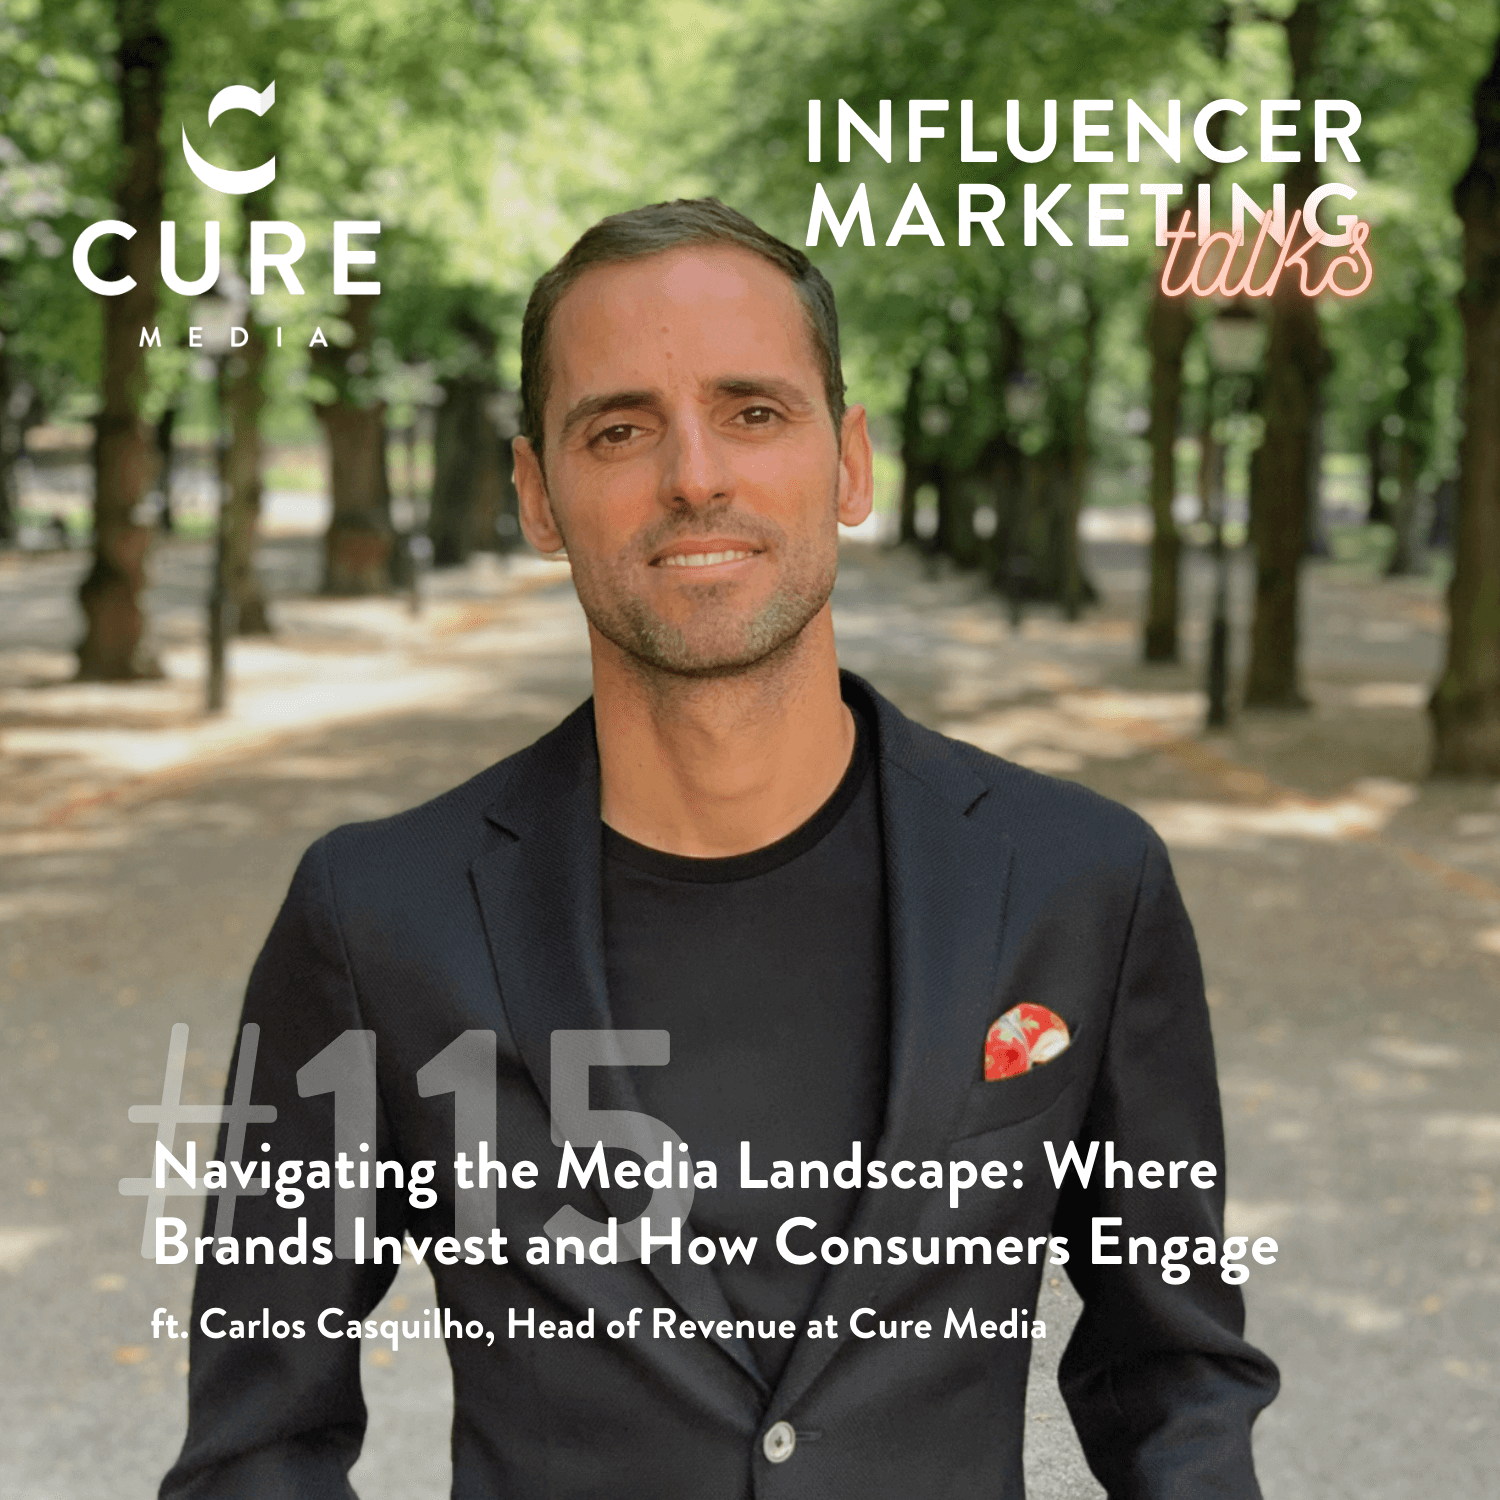 Influencer Marketing Talks E115: Navigating the Media Landscape: Where Brands Invest and How Consumers Engage